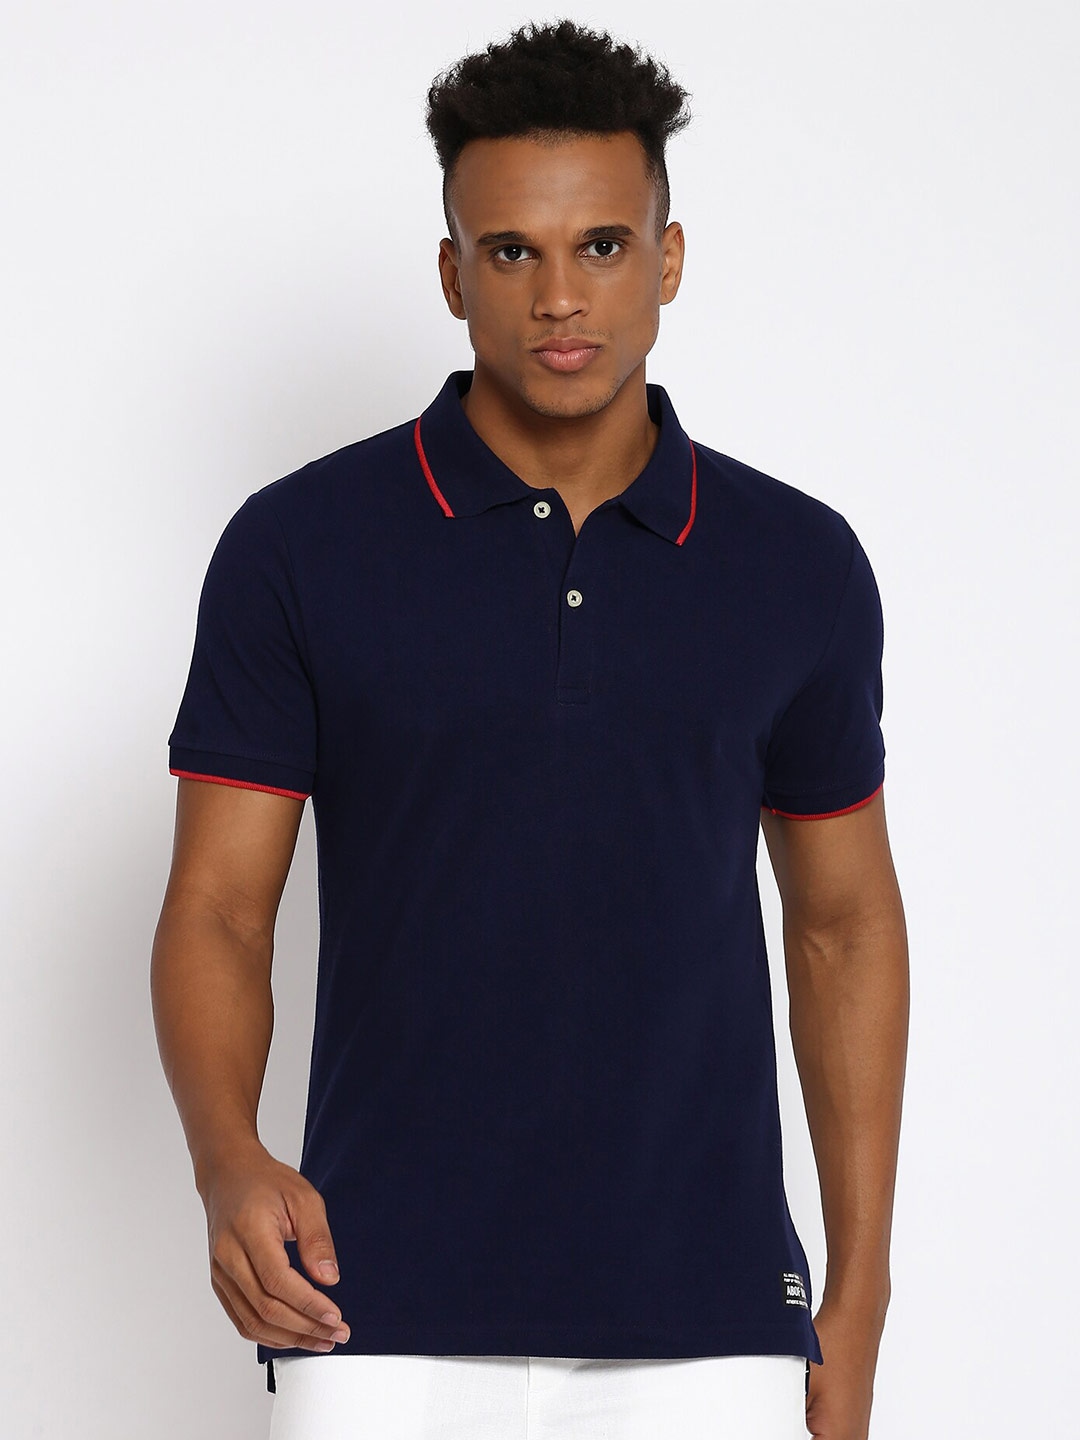 abof Men Navy Blue Polo Collar T-shirt - buy at the price of $4.00 in ...